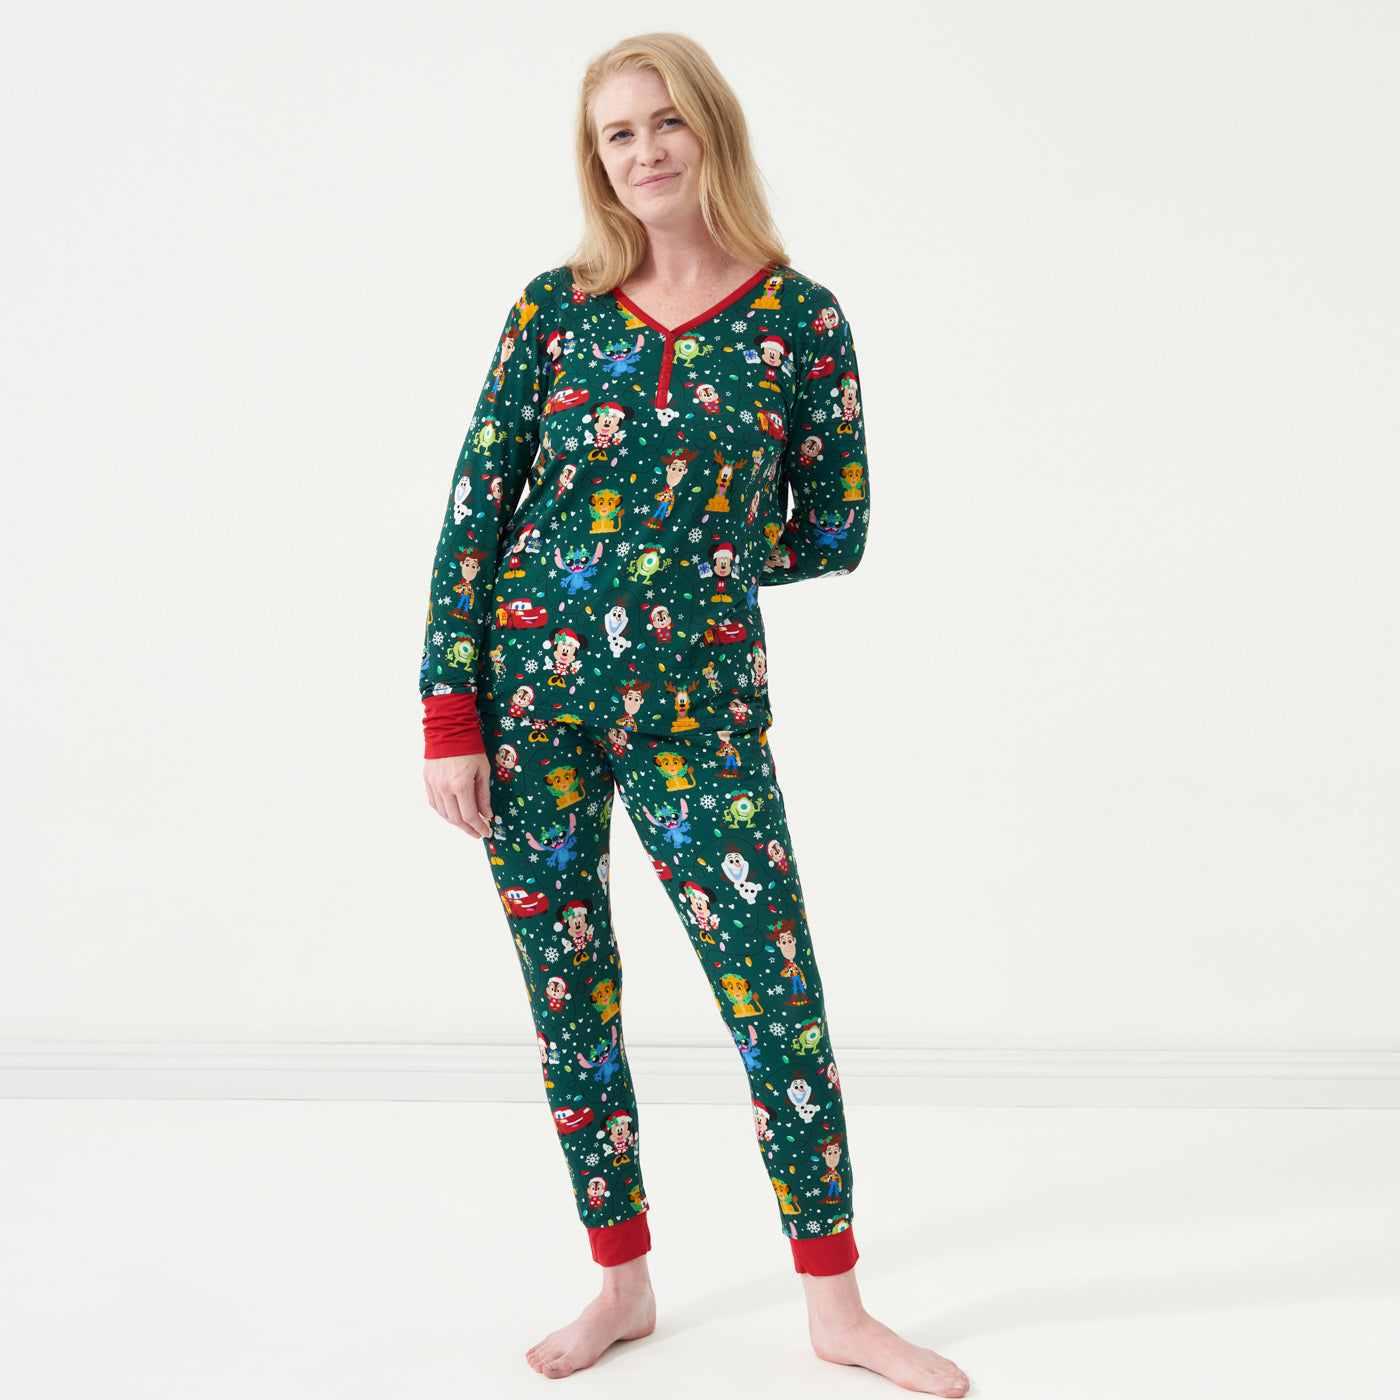 Woman wearing a Disney Christmas Party women's pajama top and matching pants